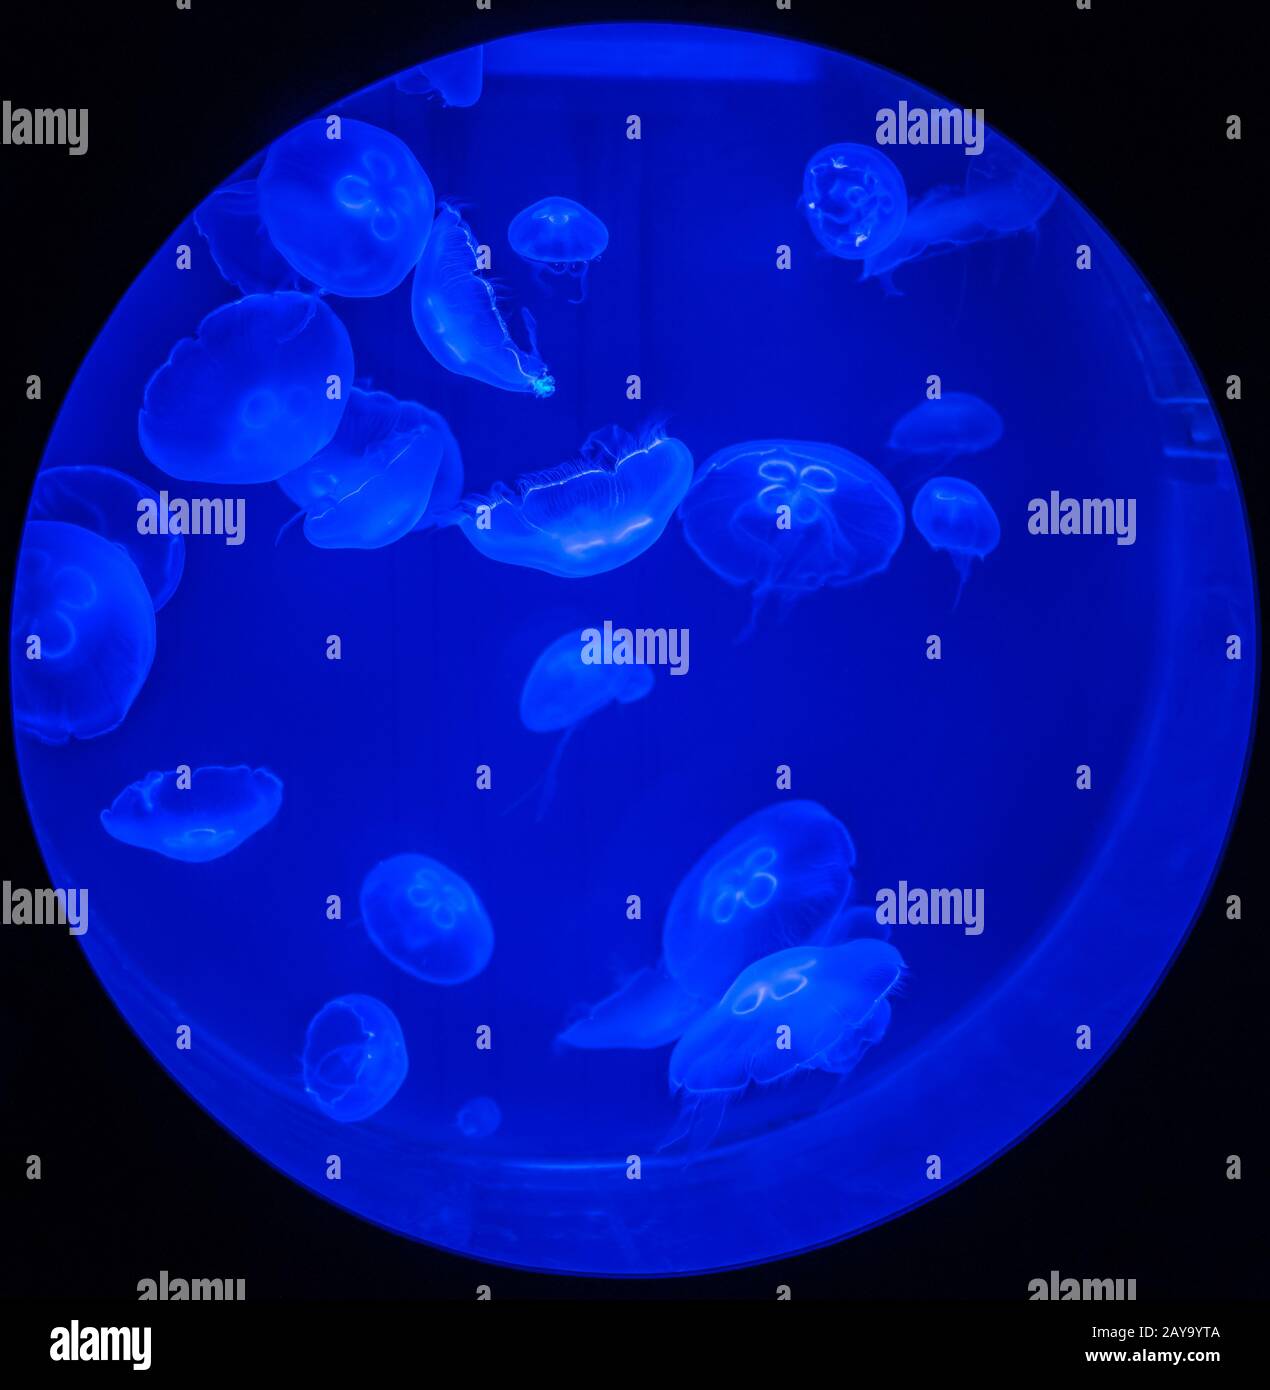 Jellyfishes in ultraviolet light in circular tank on deep blue background Stock Photo